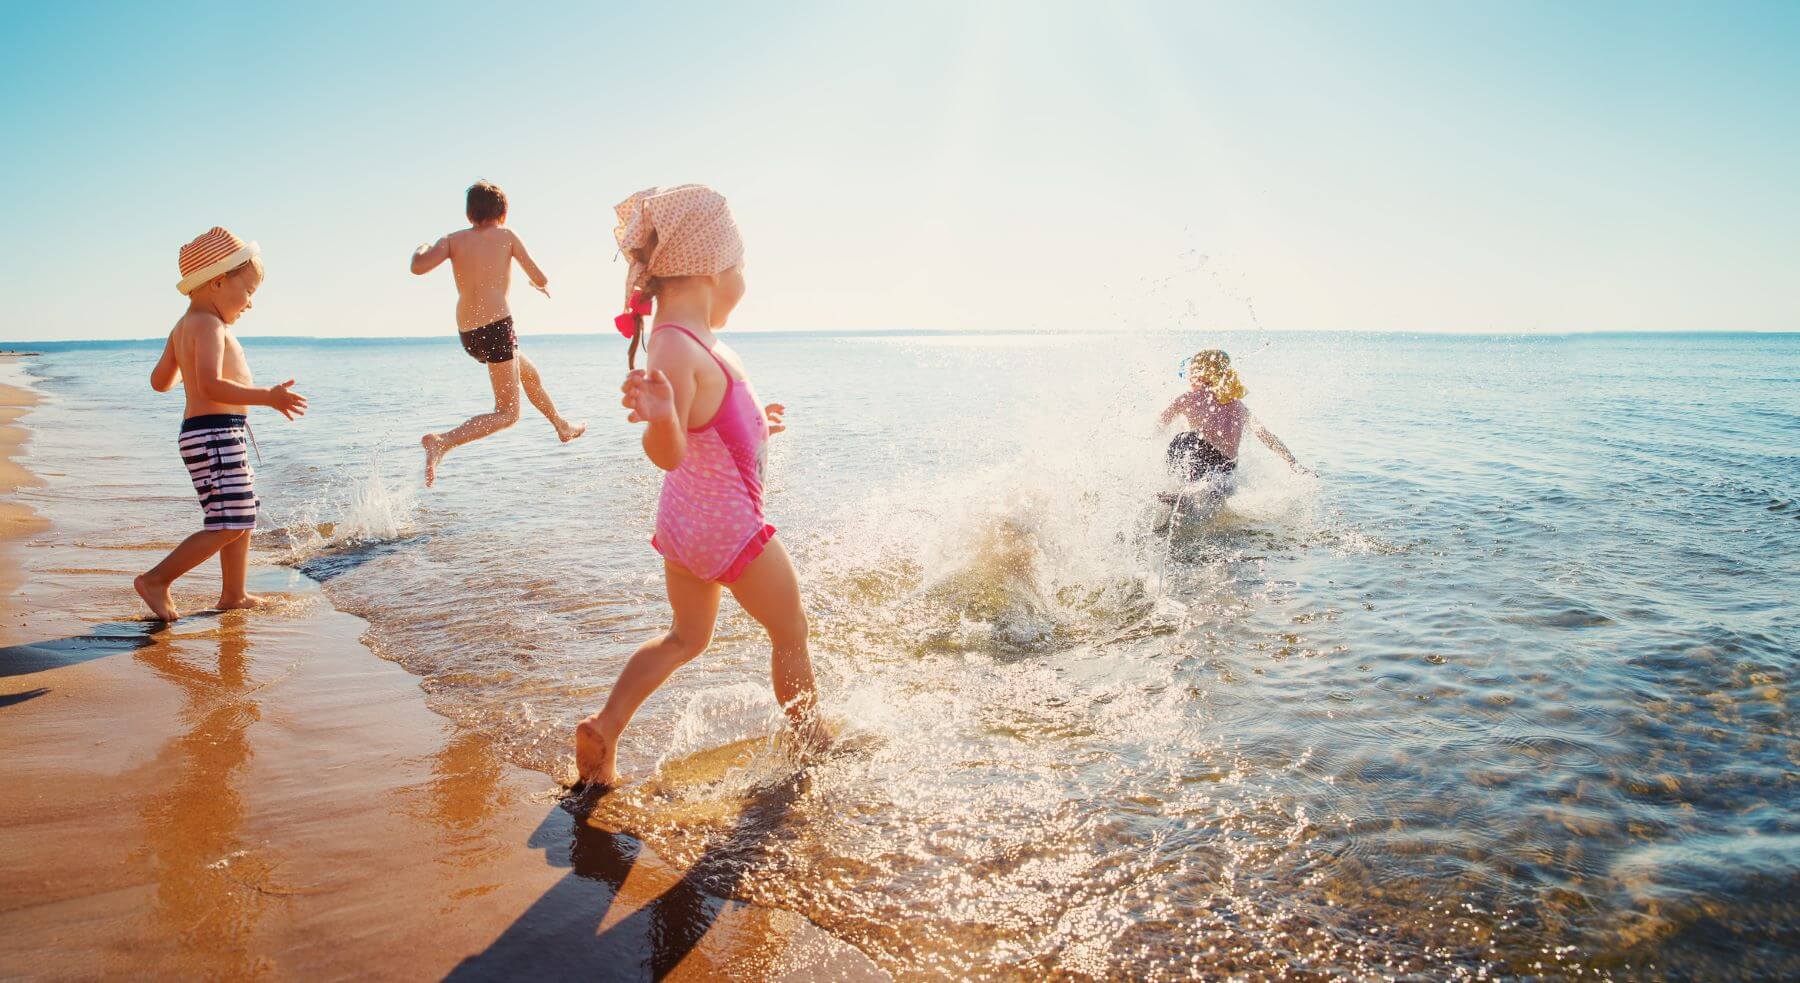 children running into the ocean on the beach fun kids laughter happy